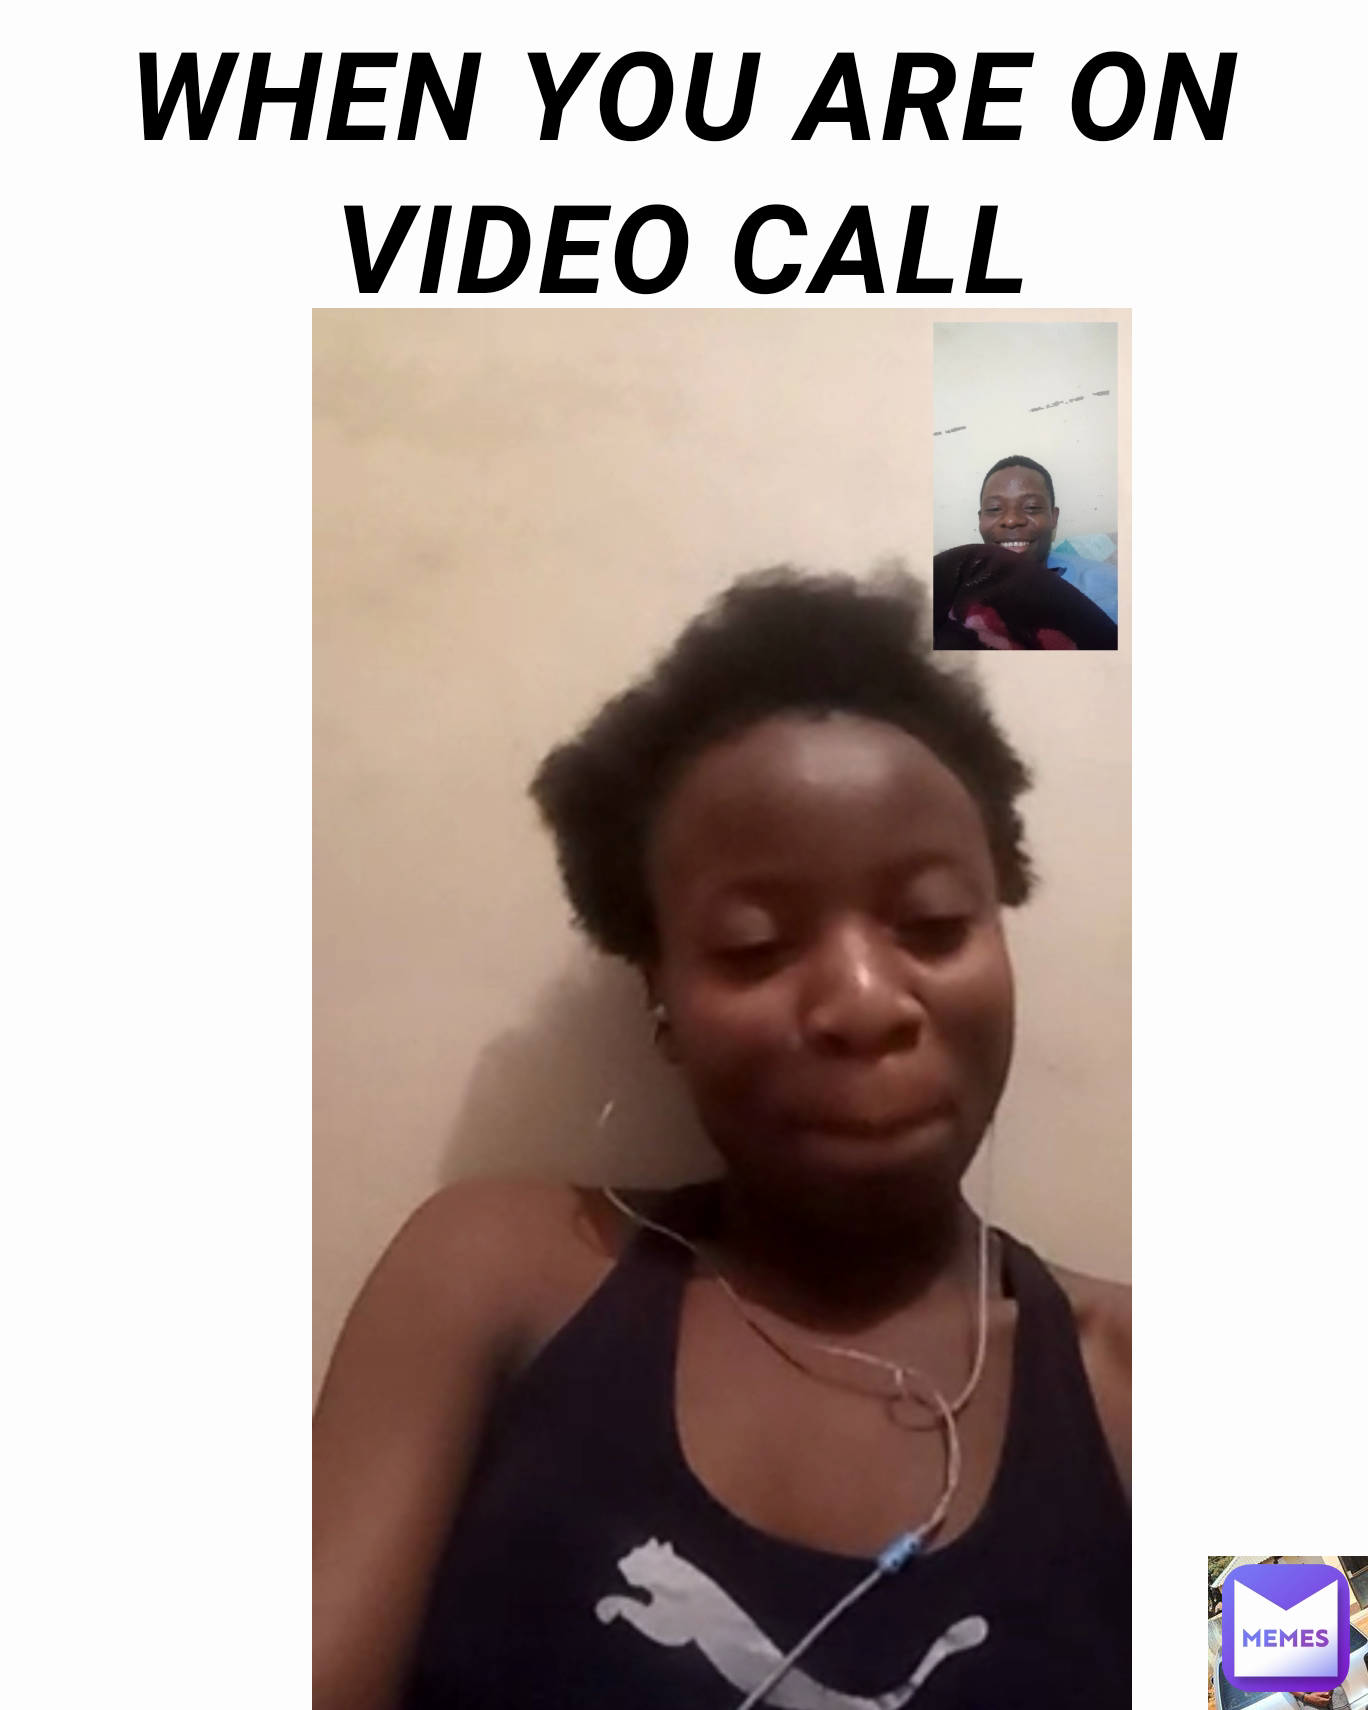 WHEN YOU ARE ON VIDEO CALL